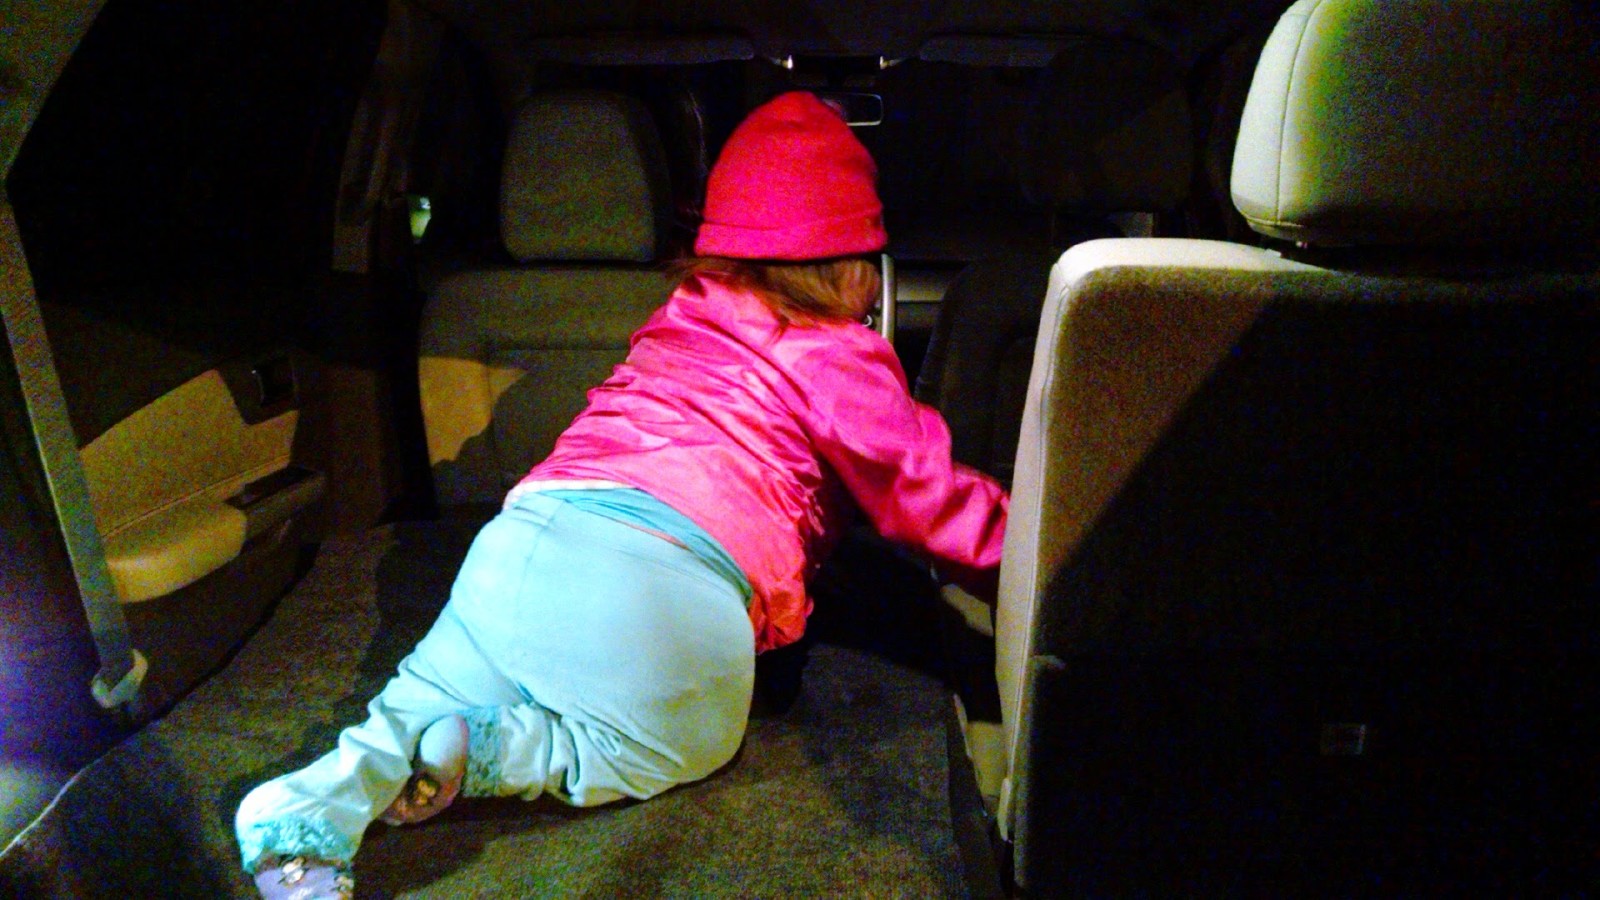 Climbing into her car seat